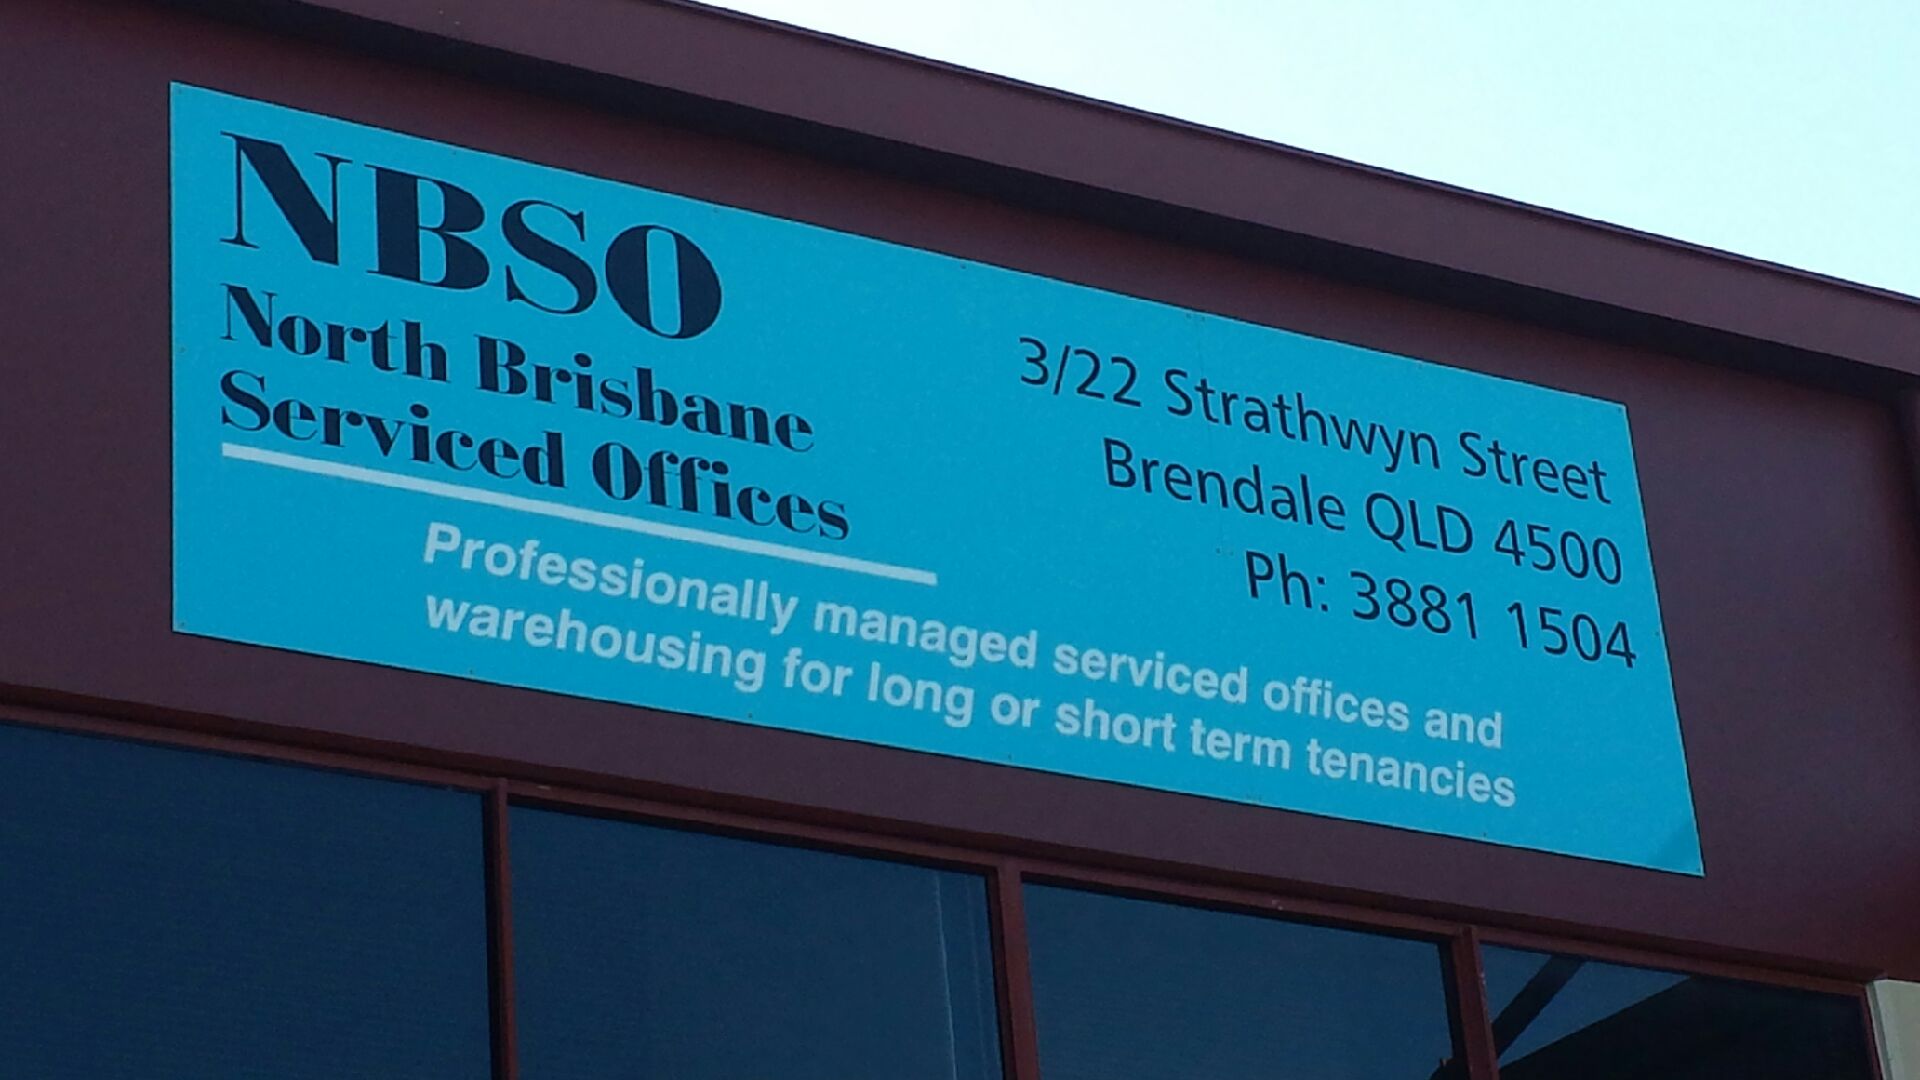 Conveniently located in Brendale, NBSO is located close to the Bruce Highway, heading north, and the Gateway Arterial, heading south.